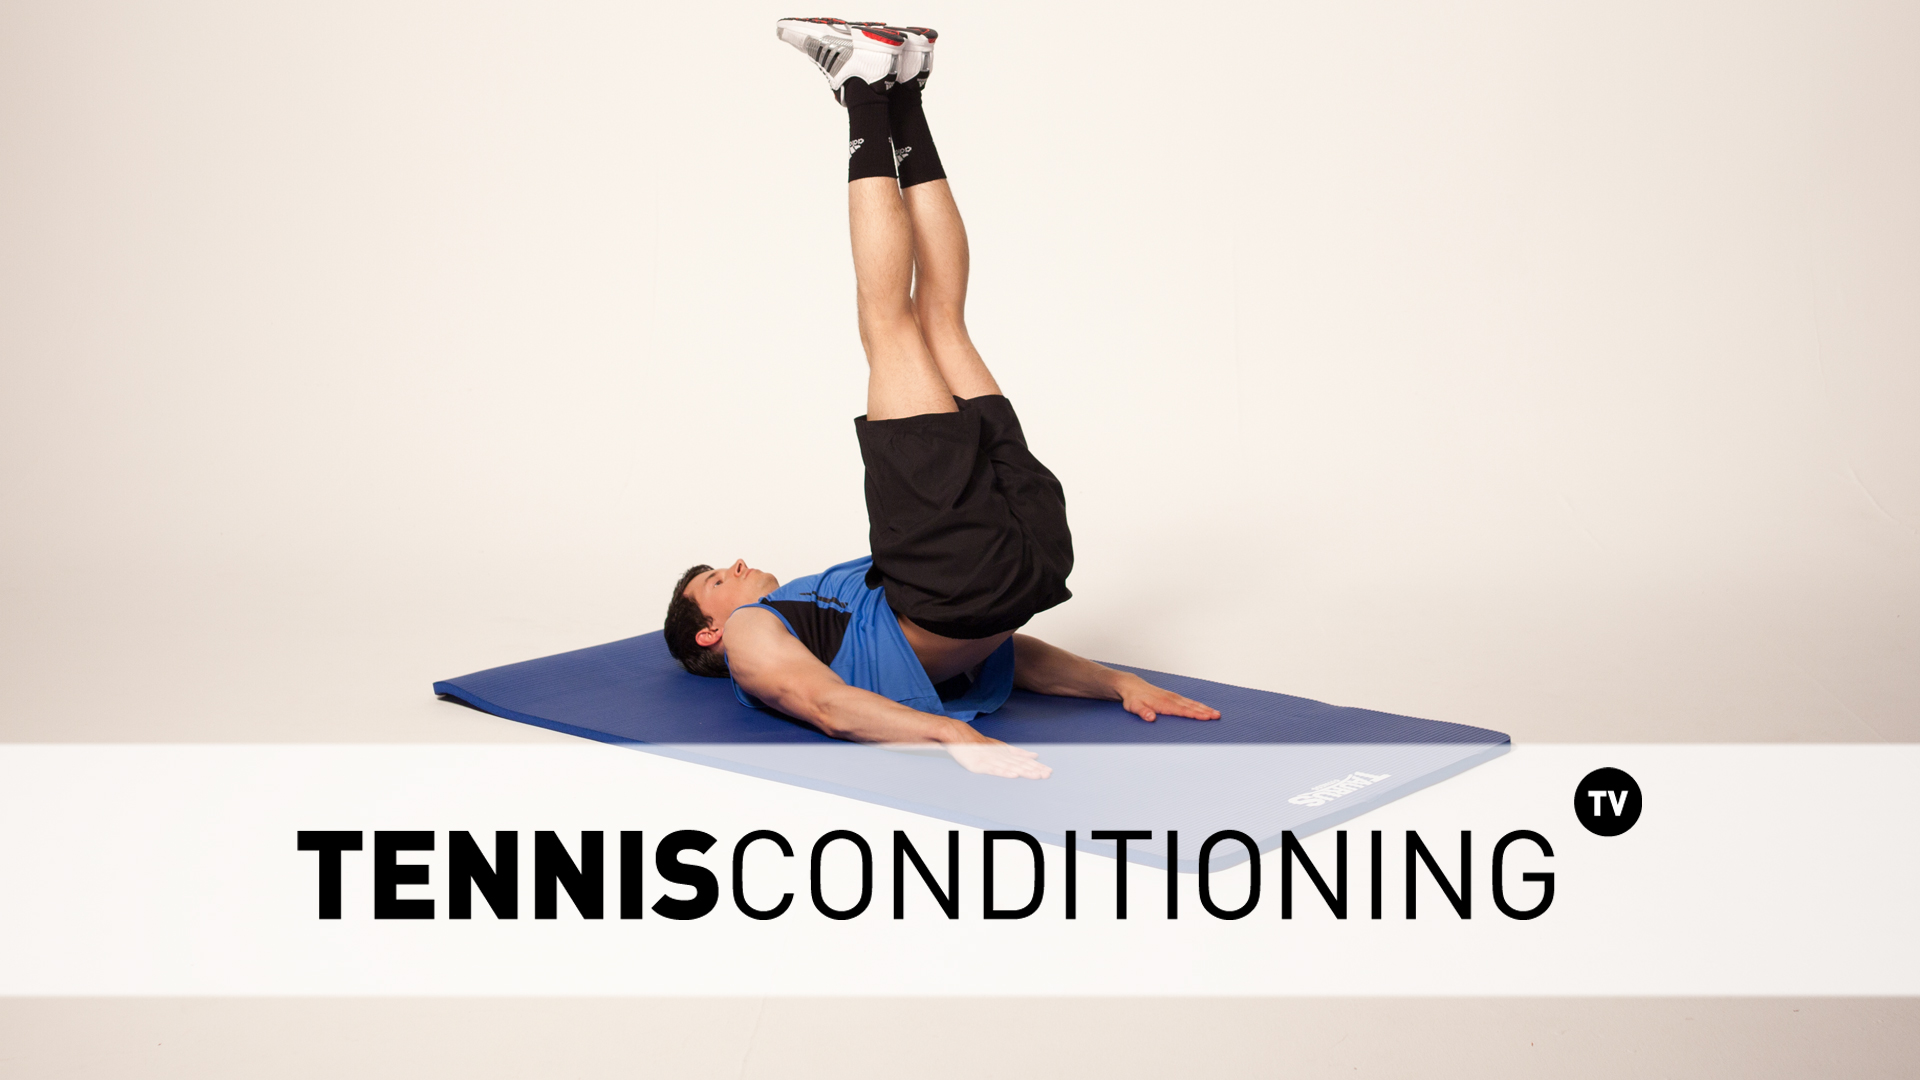 Supine Hip Lifts  Tennis Conditioning